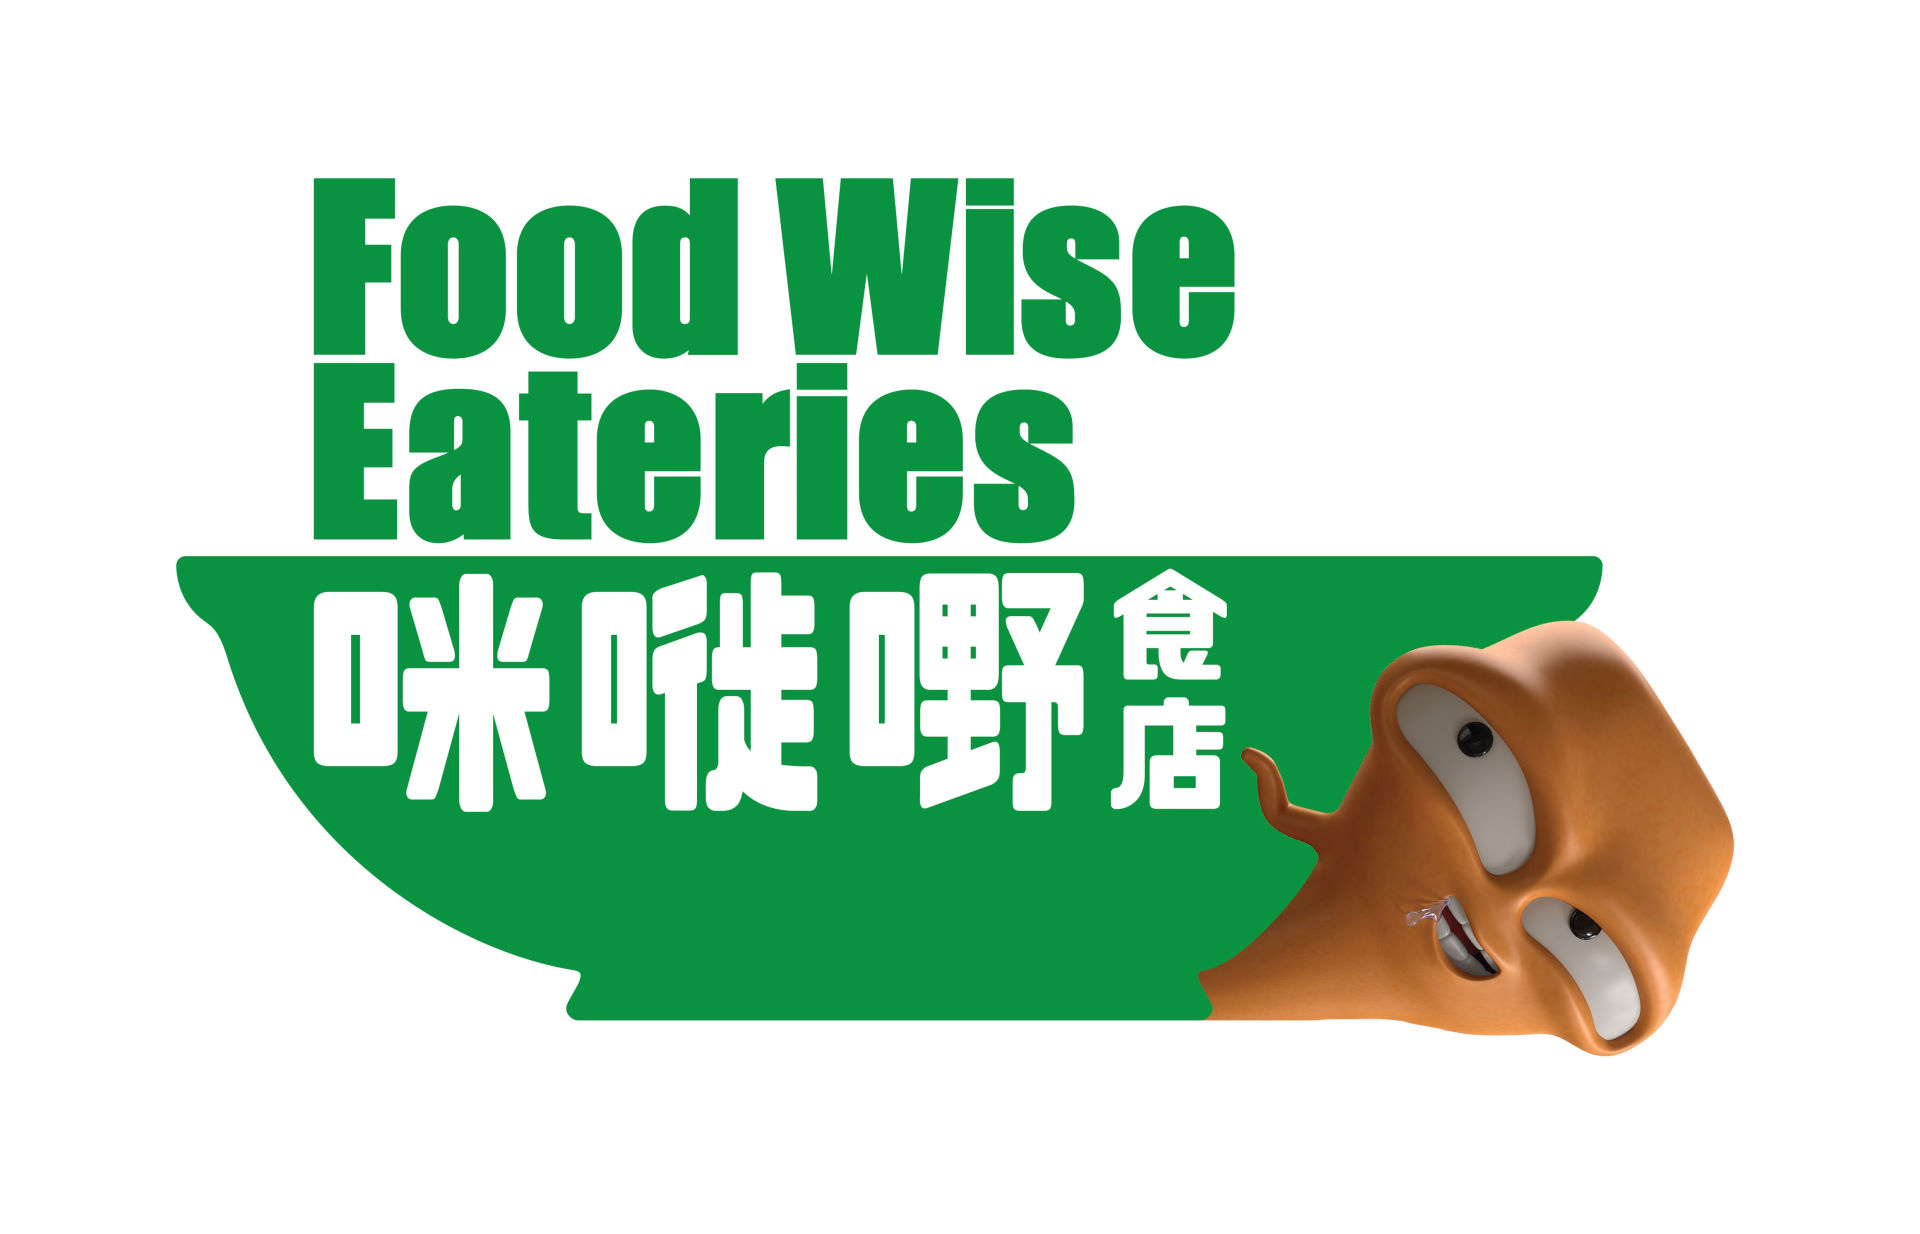 FoodWise